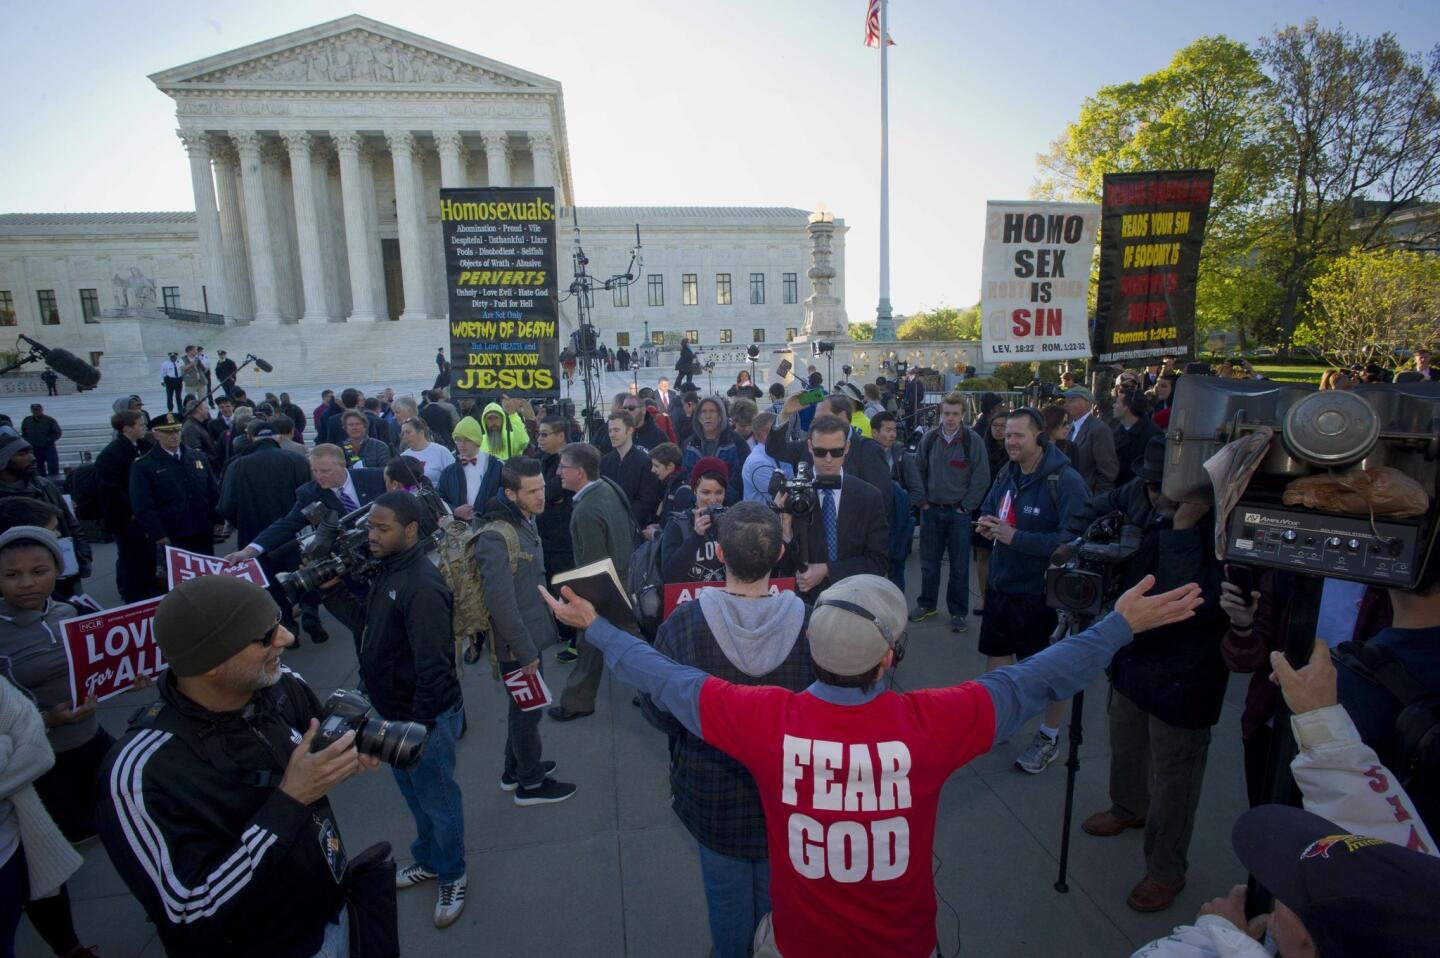 Supreme Court hears arguments on same-sex marriage